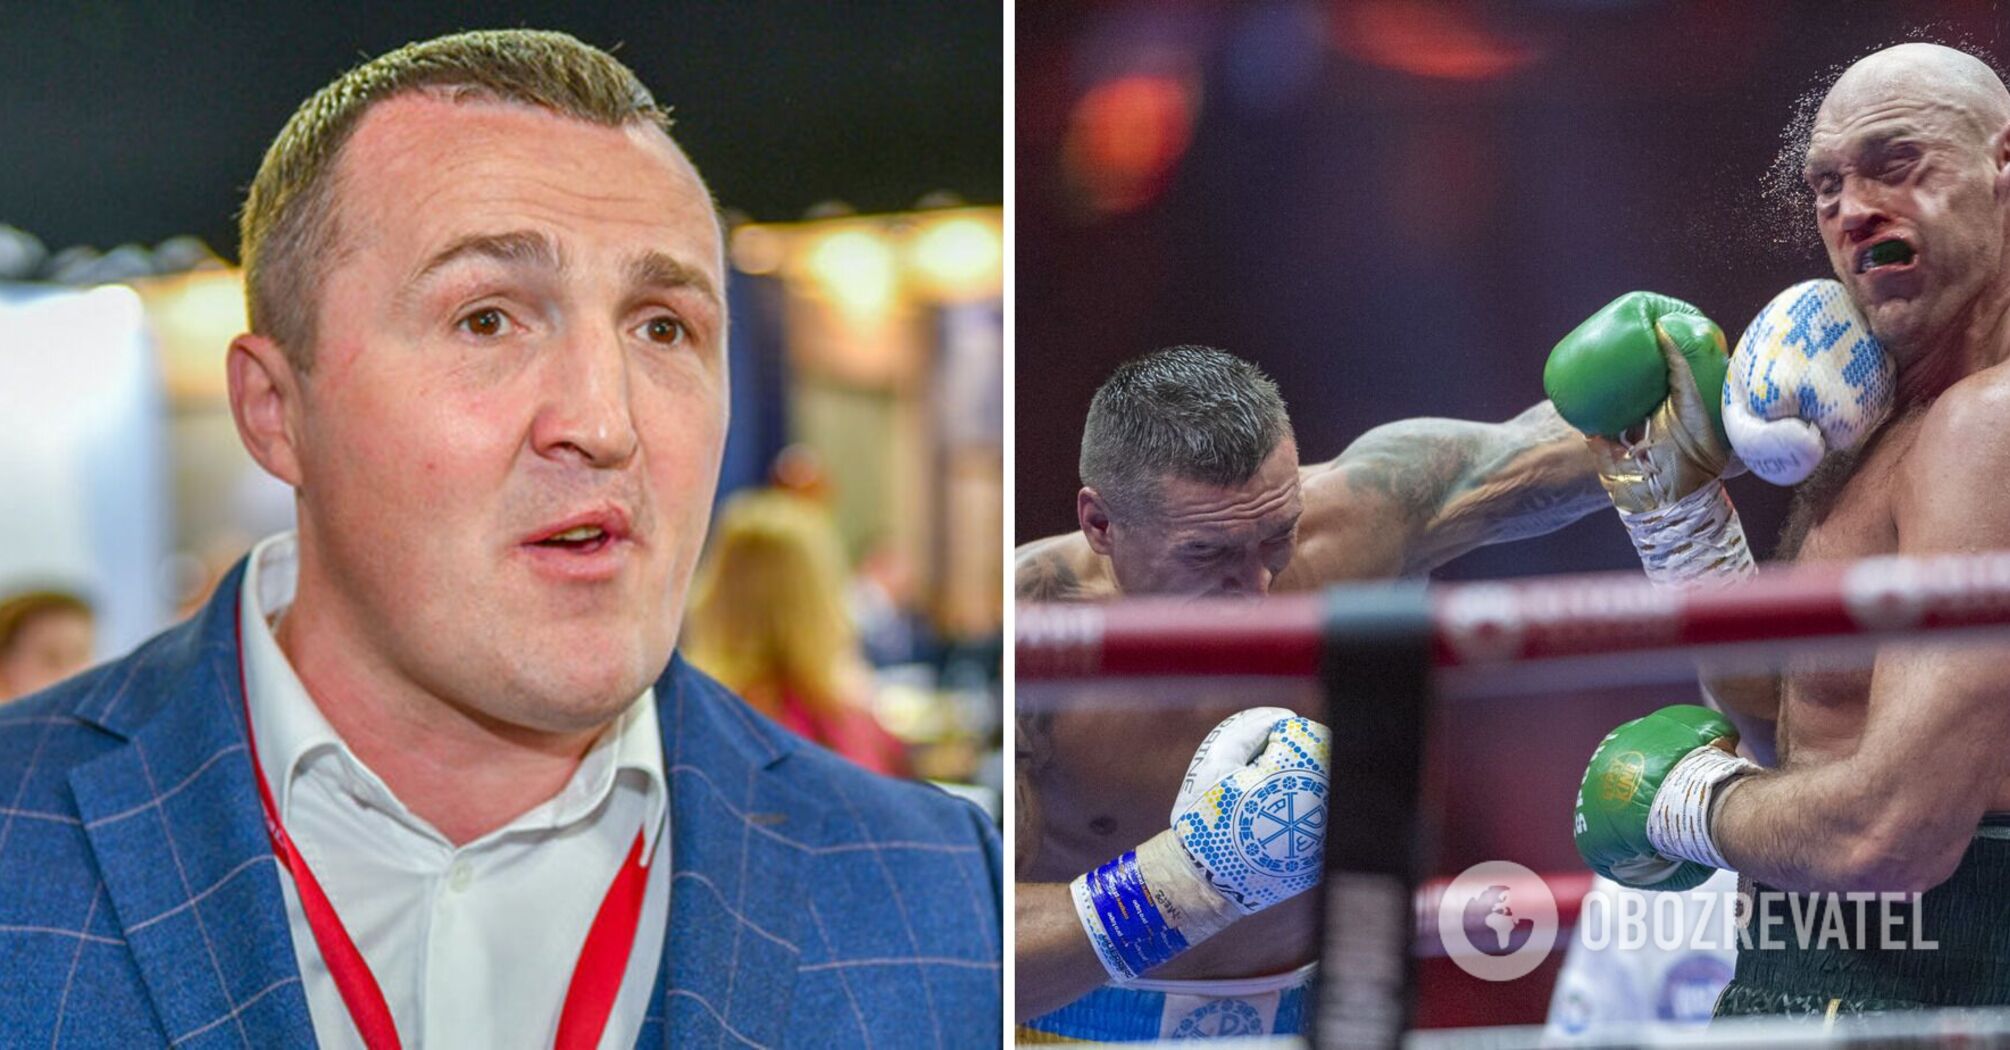 'It was deserved!' The former world champion from Russia admired Usyk's victory over Fury